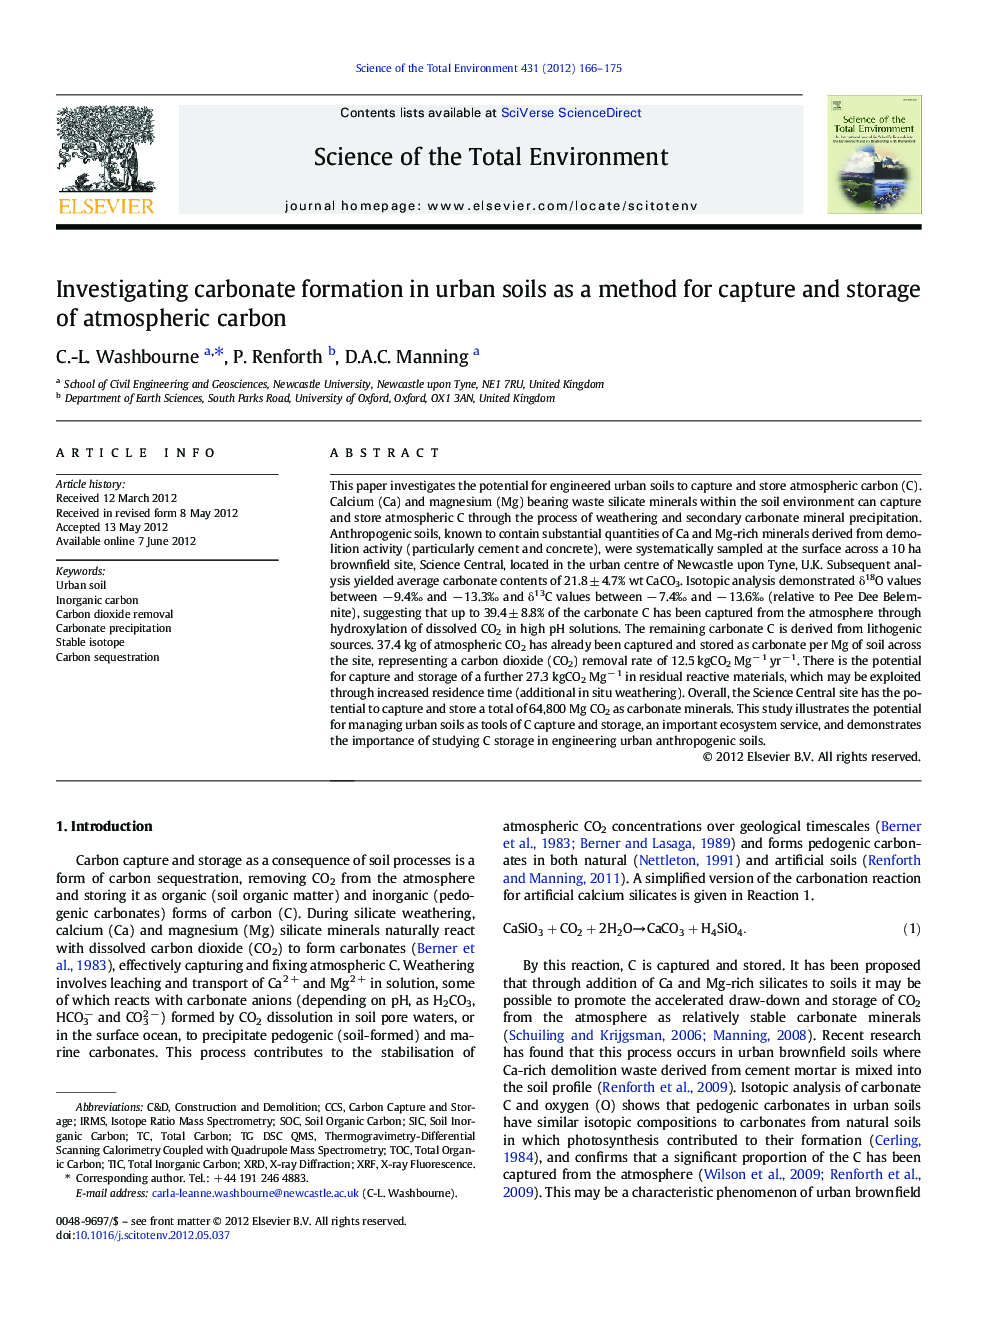 Investigating carbonate formation in urban soils as a method for capture and storage of atmospheric carbon